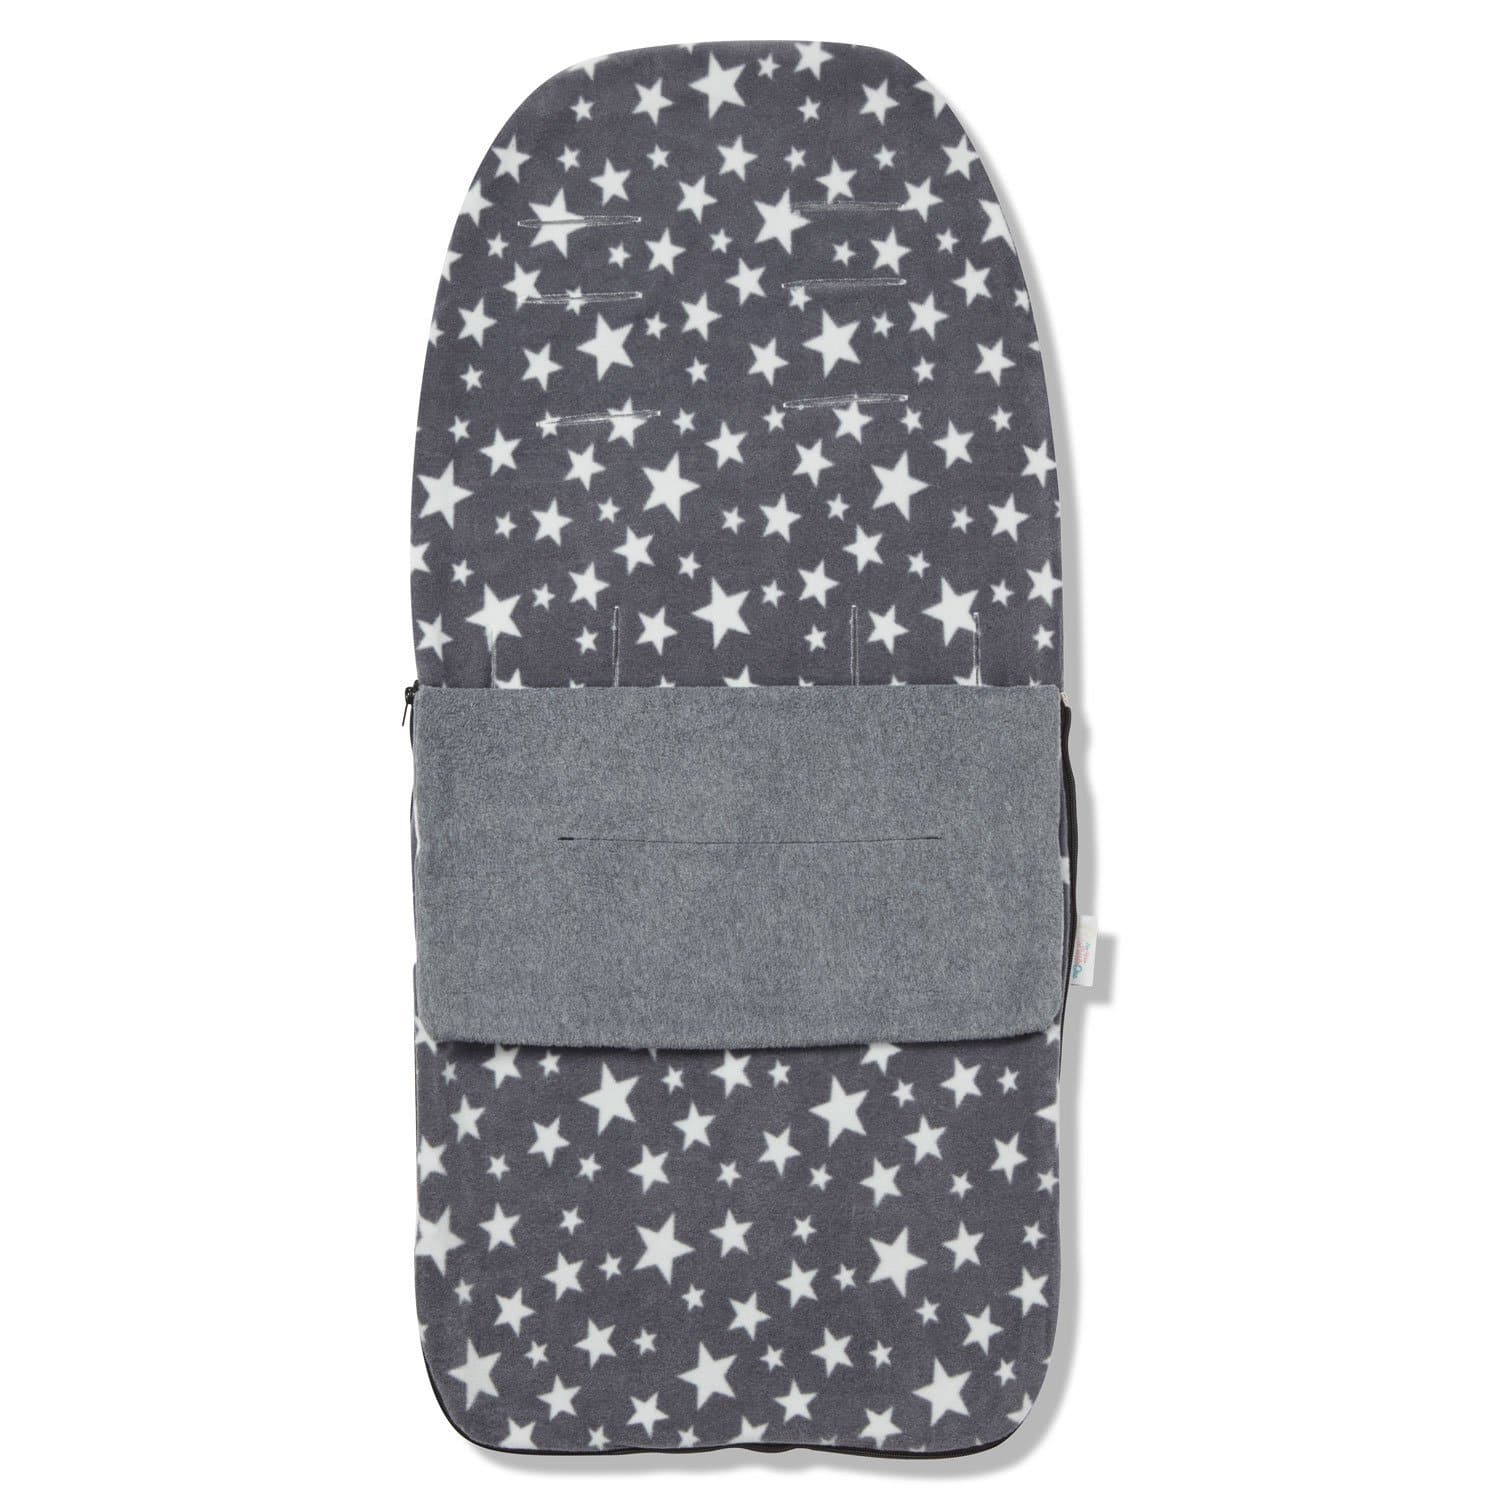 Snuggle Summer Footmuff Compatible with Zeta - Grey Star / Fits All Models | For Your Little One